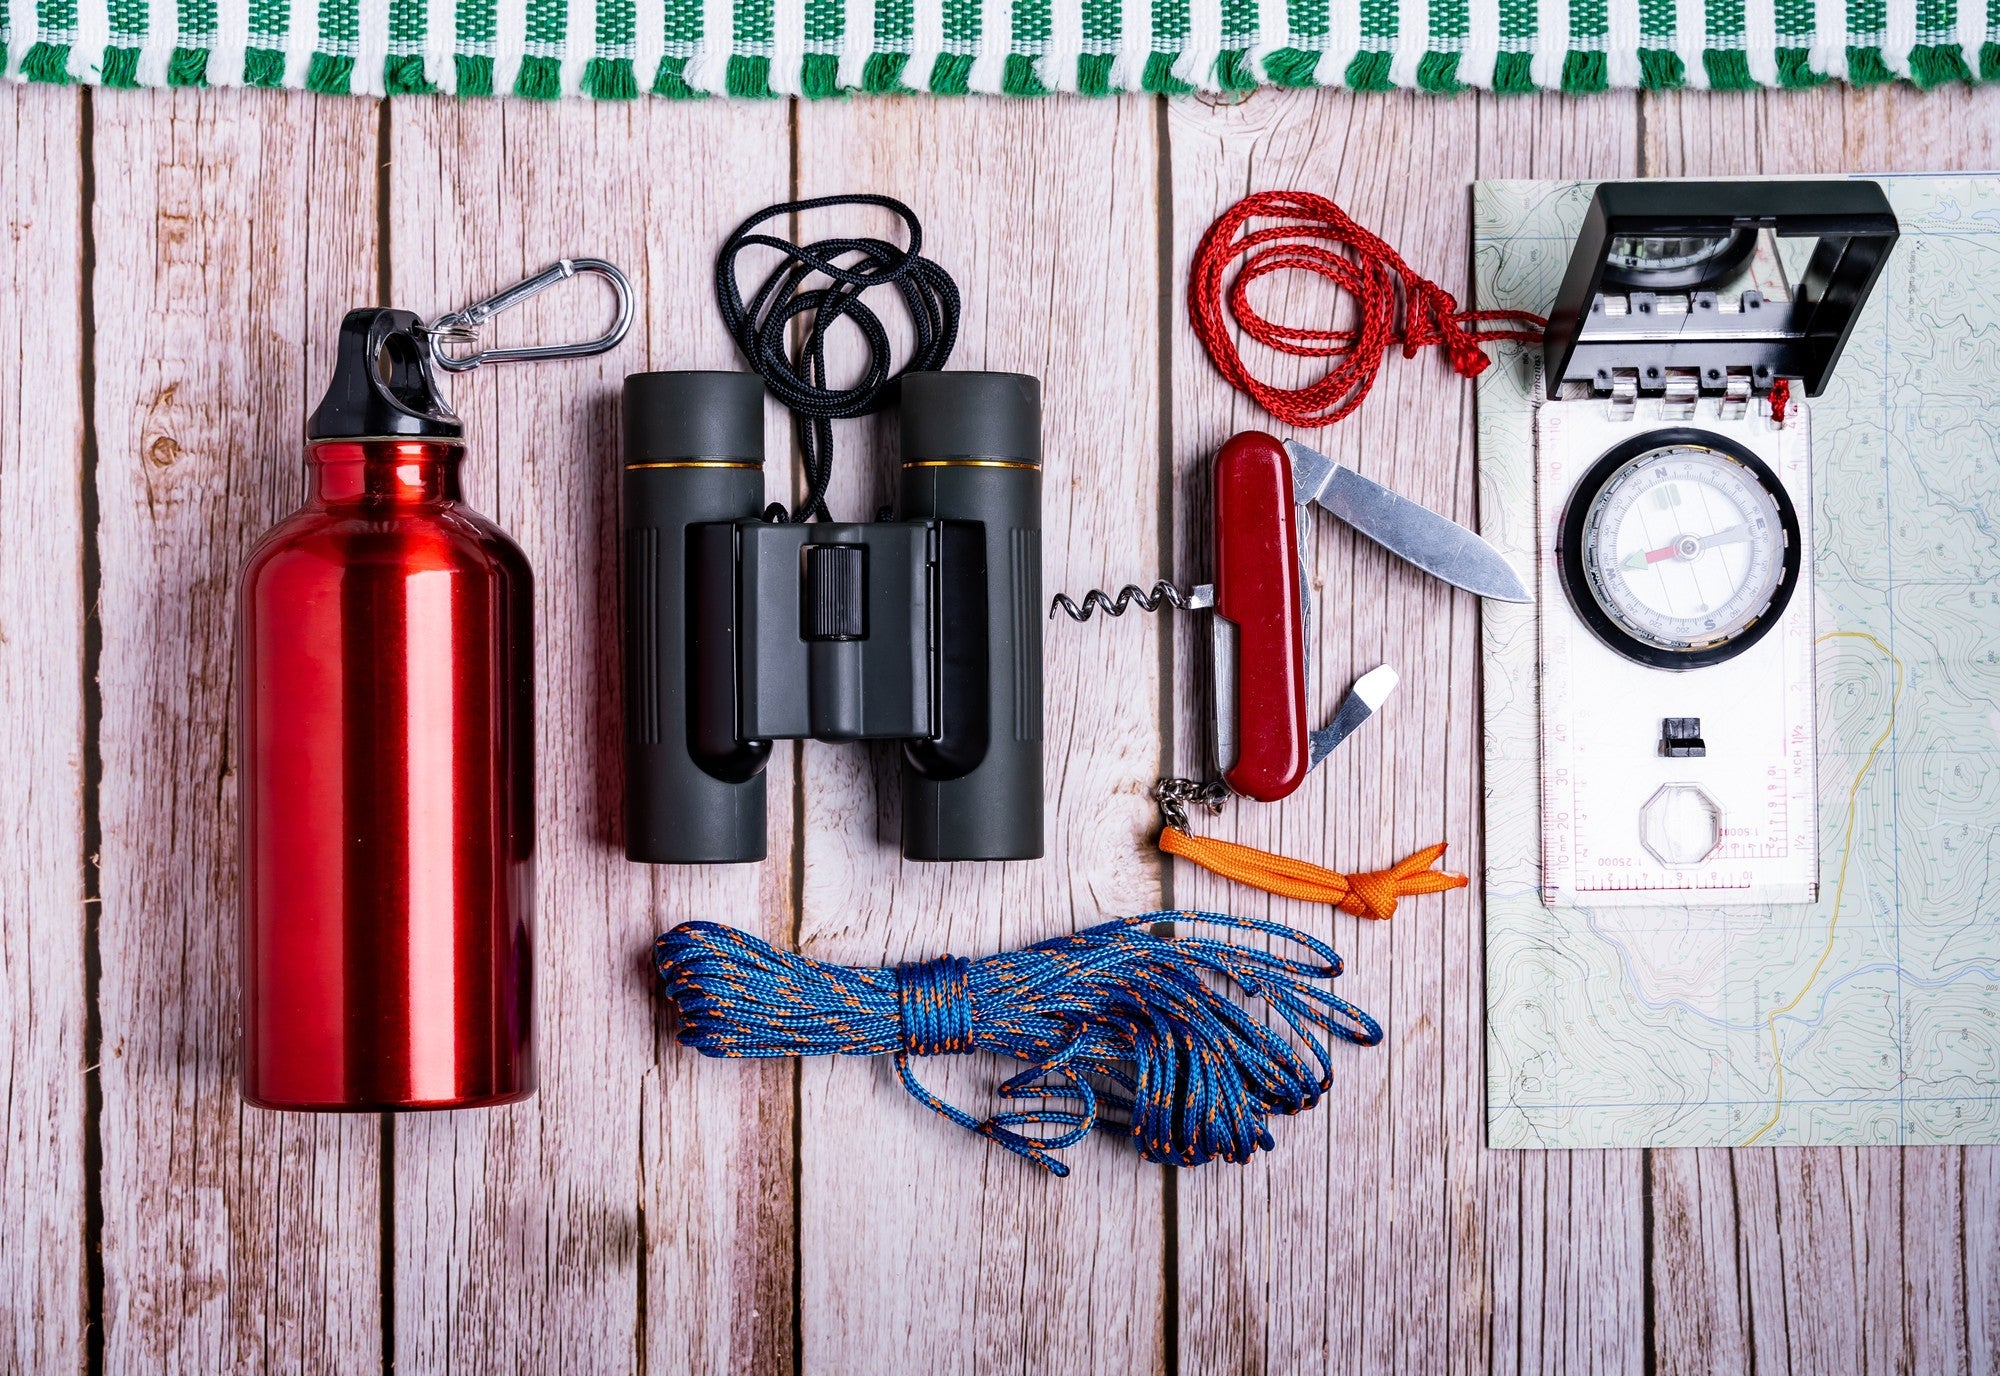 Survival Tools and Gear